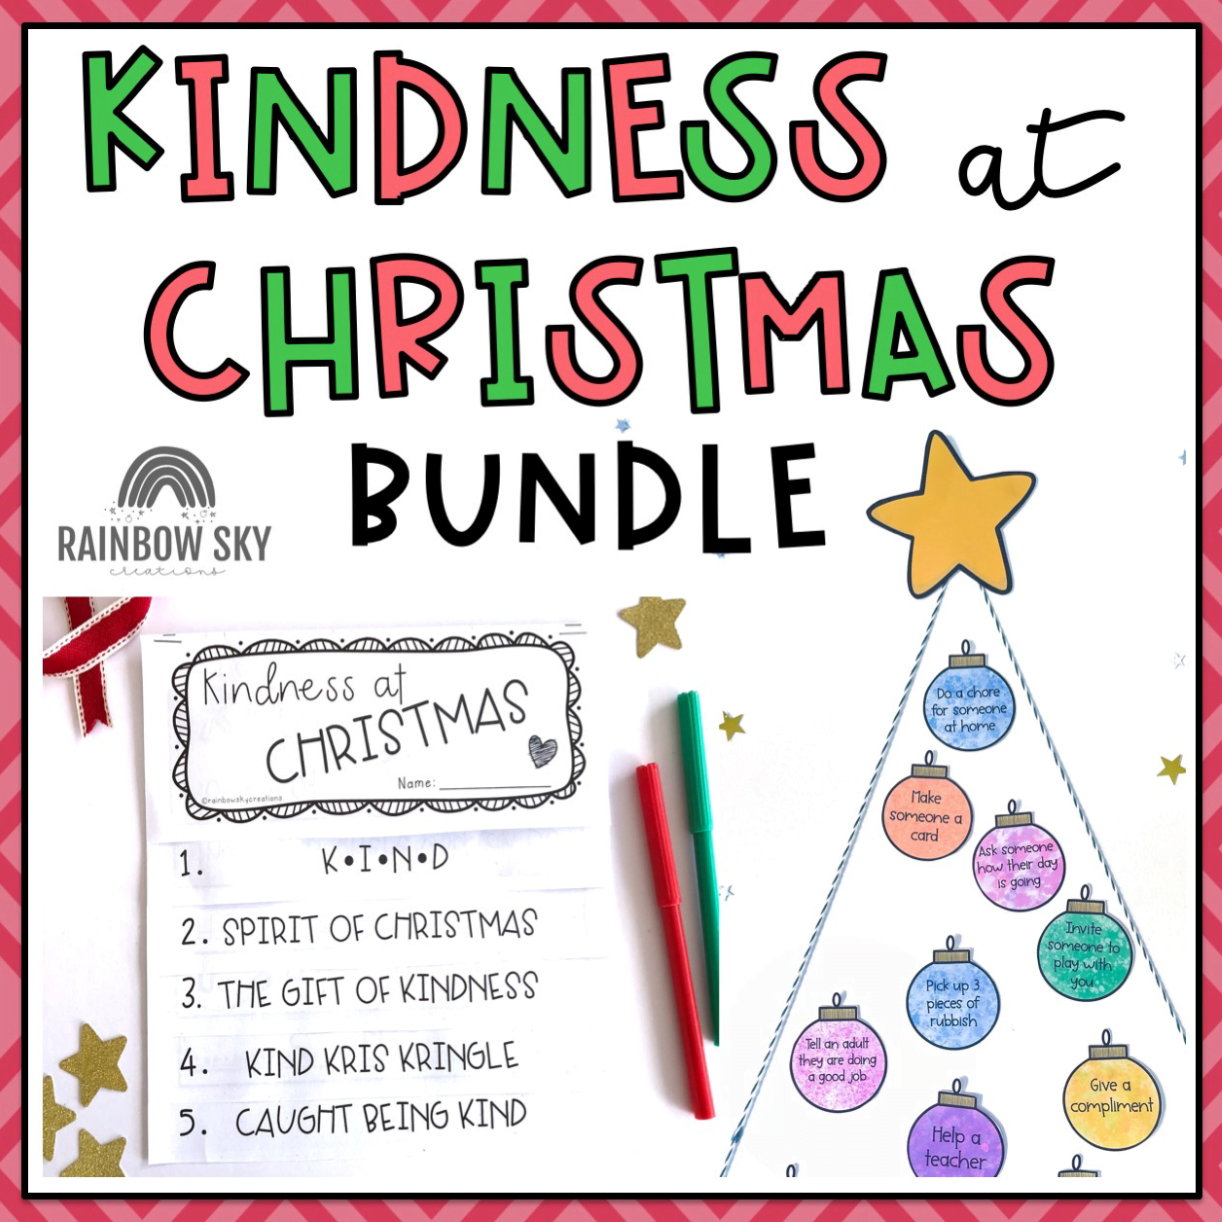 promote kindness with this Kindness at Christmas Bundle